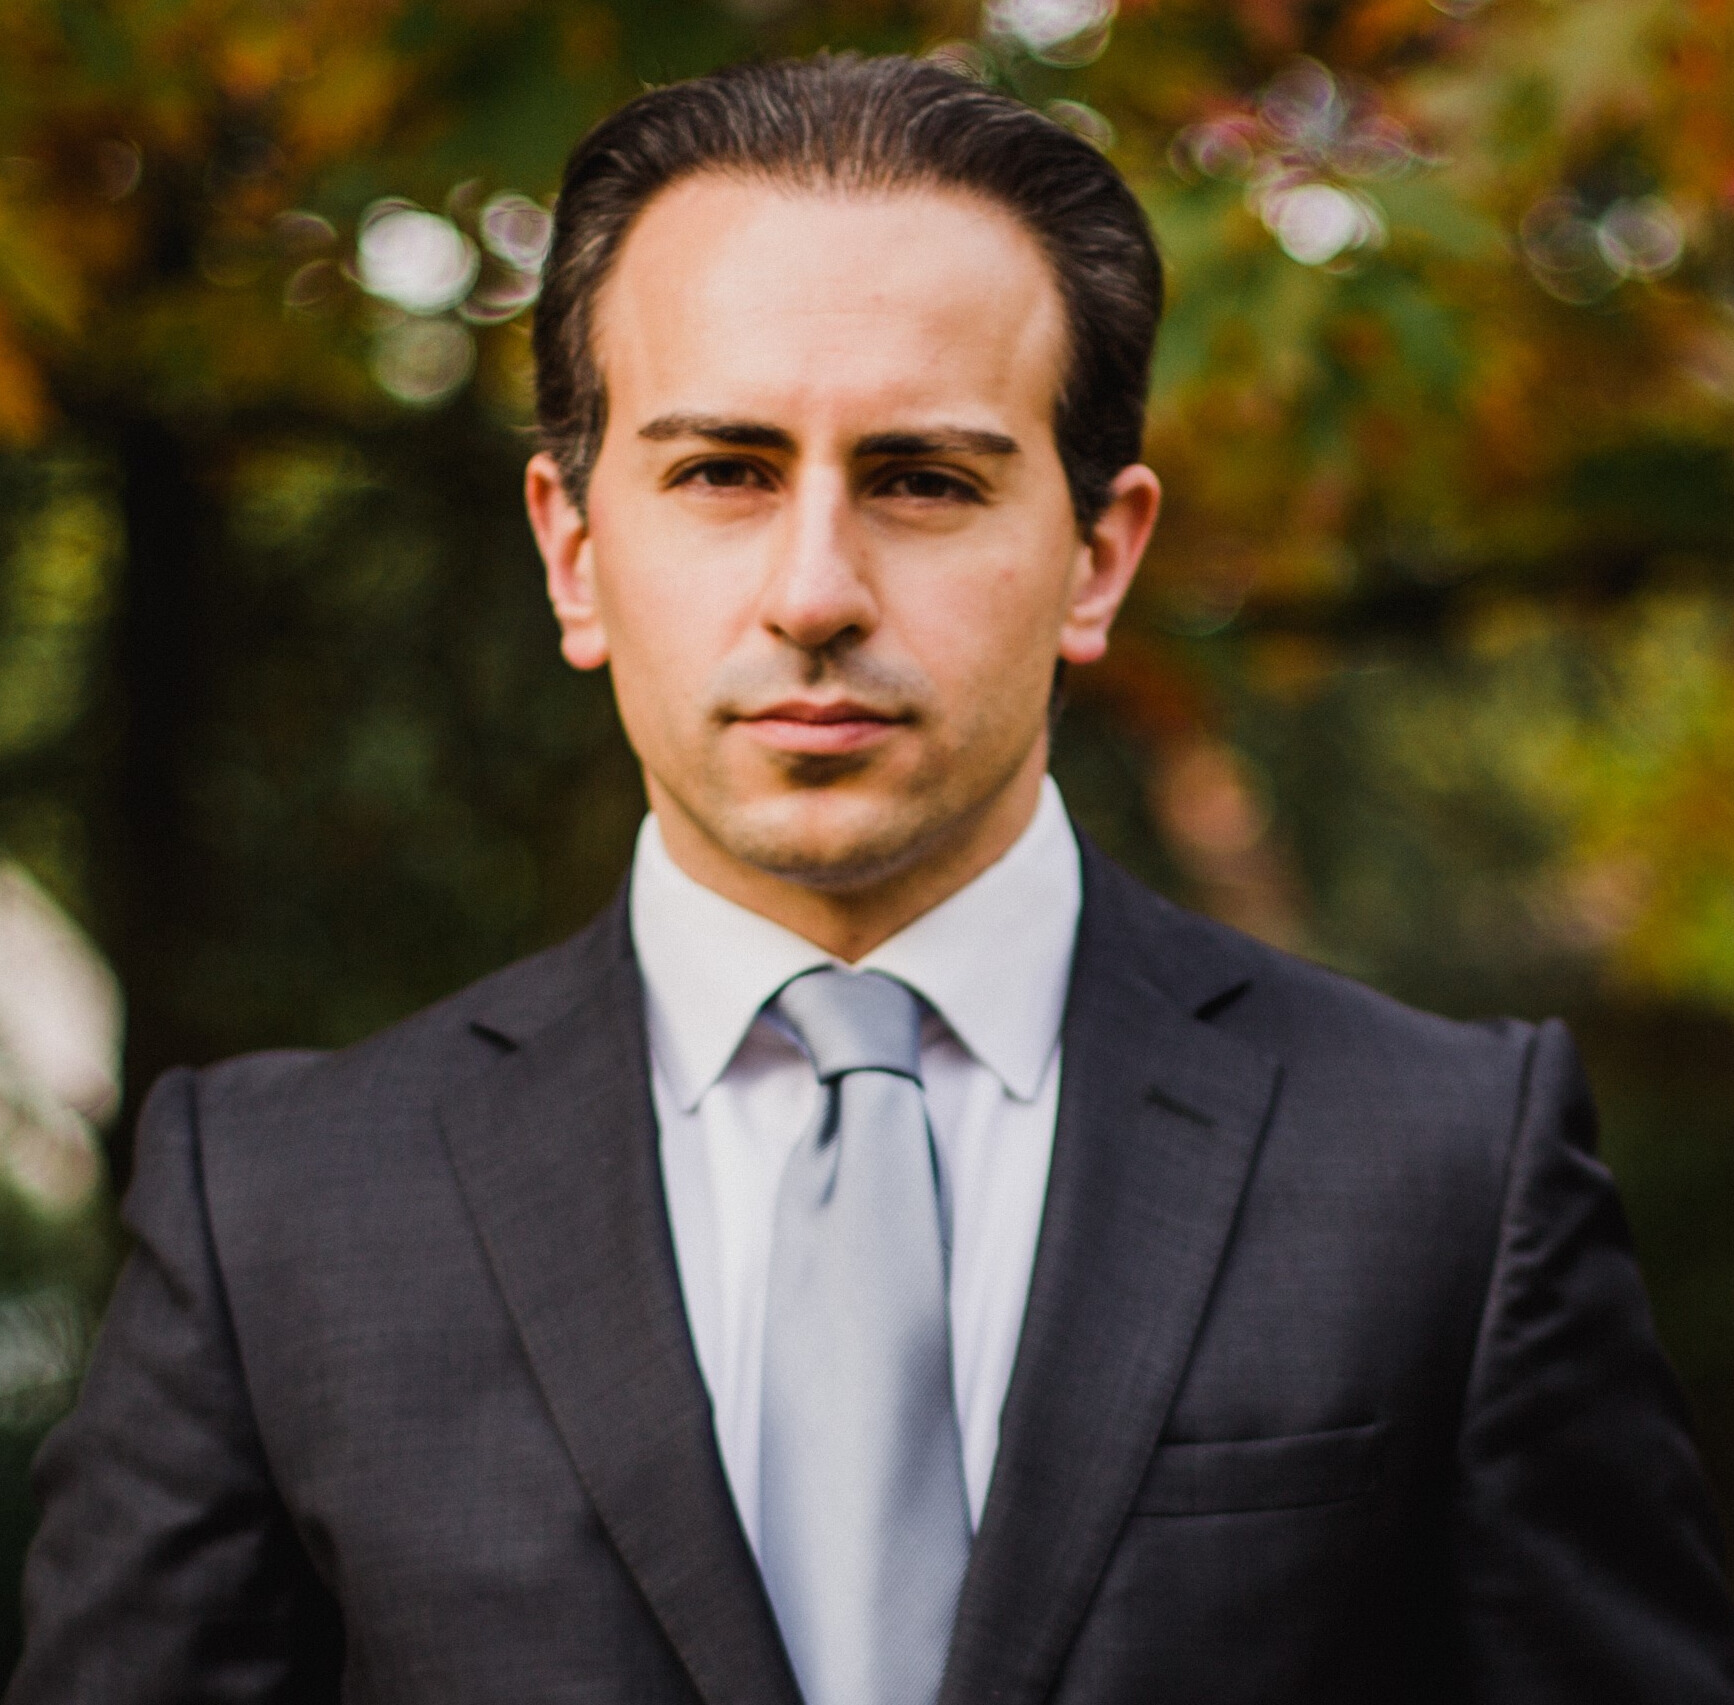 Europa strengthens Investment Management function with the appointment of Amirali Kasraie as Managing Director